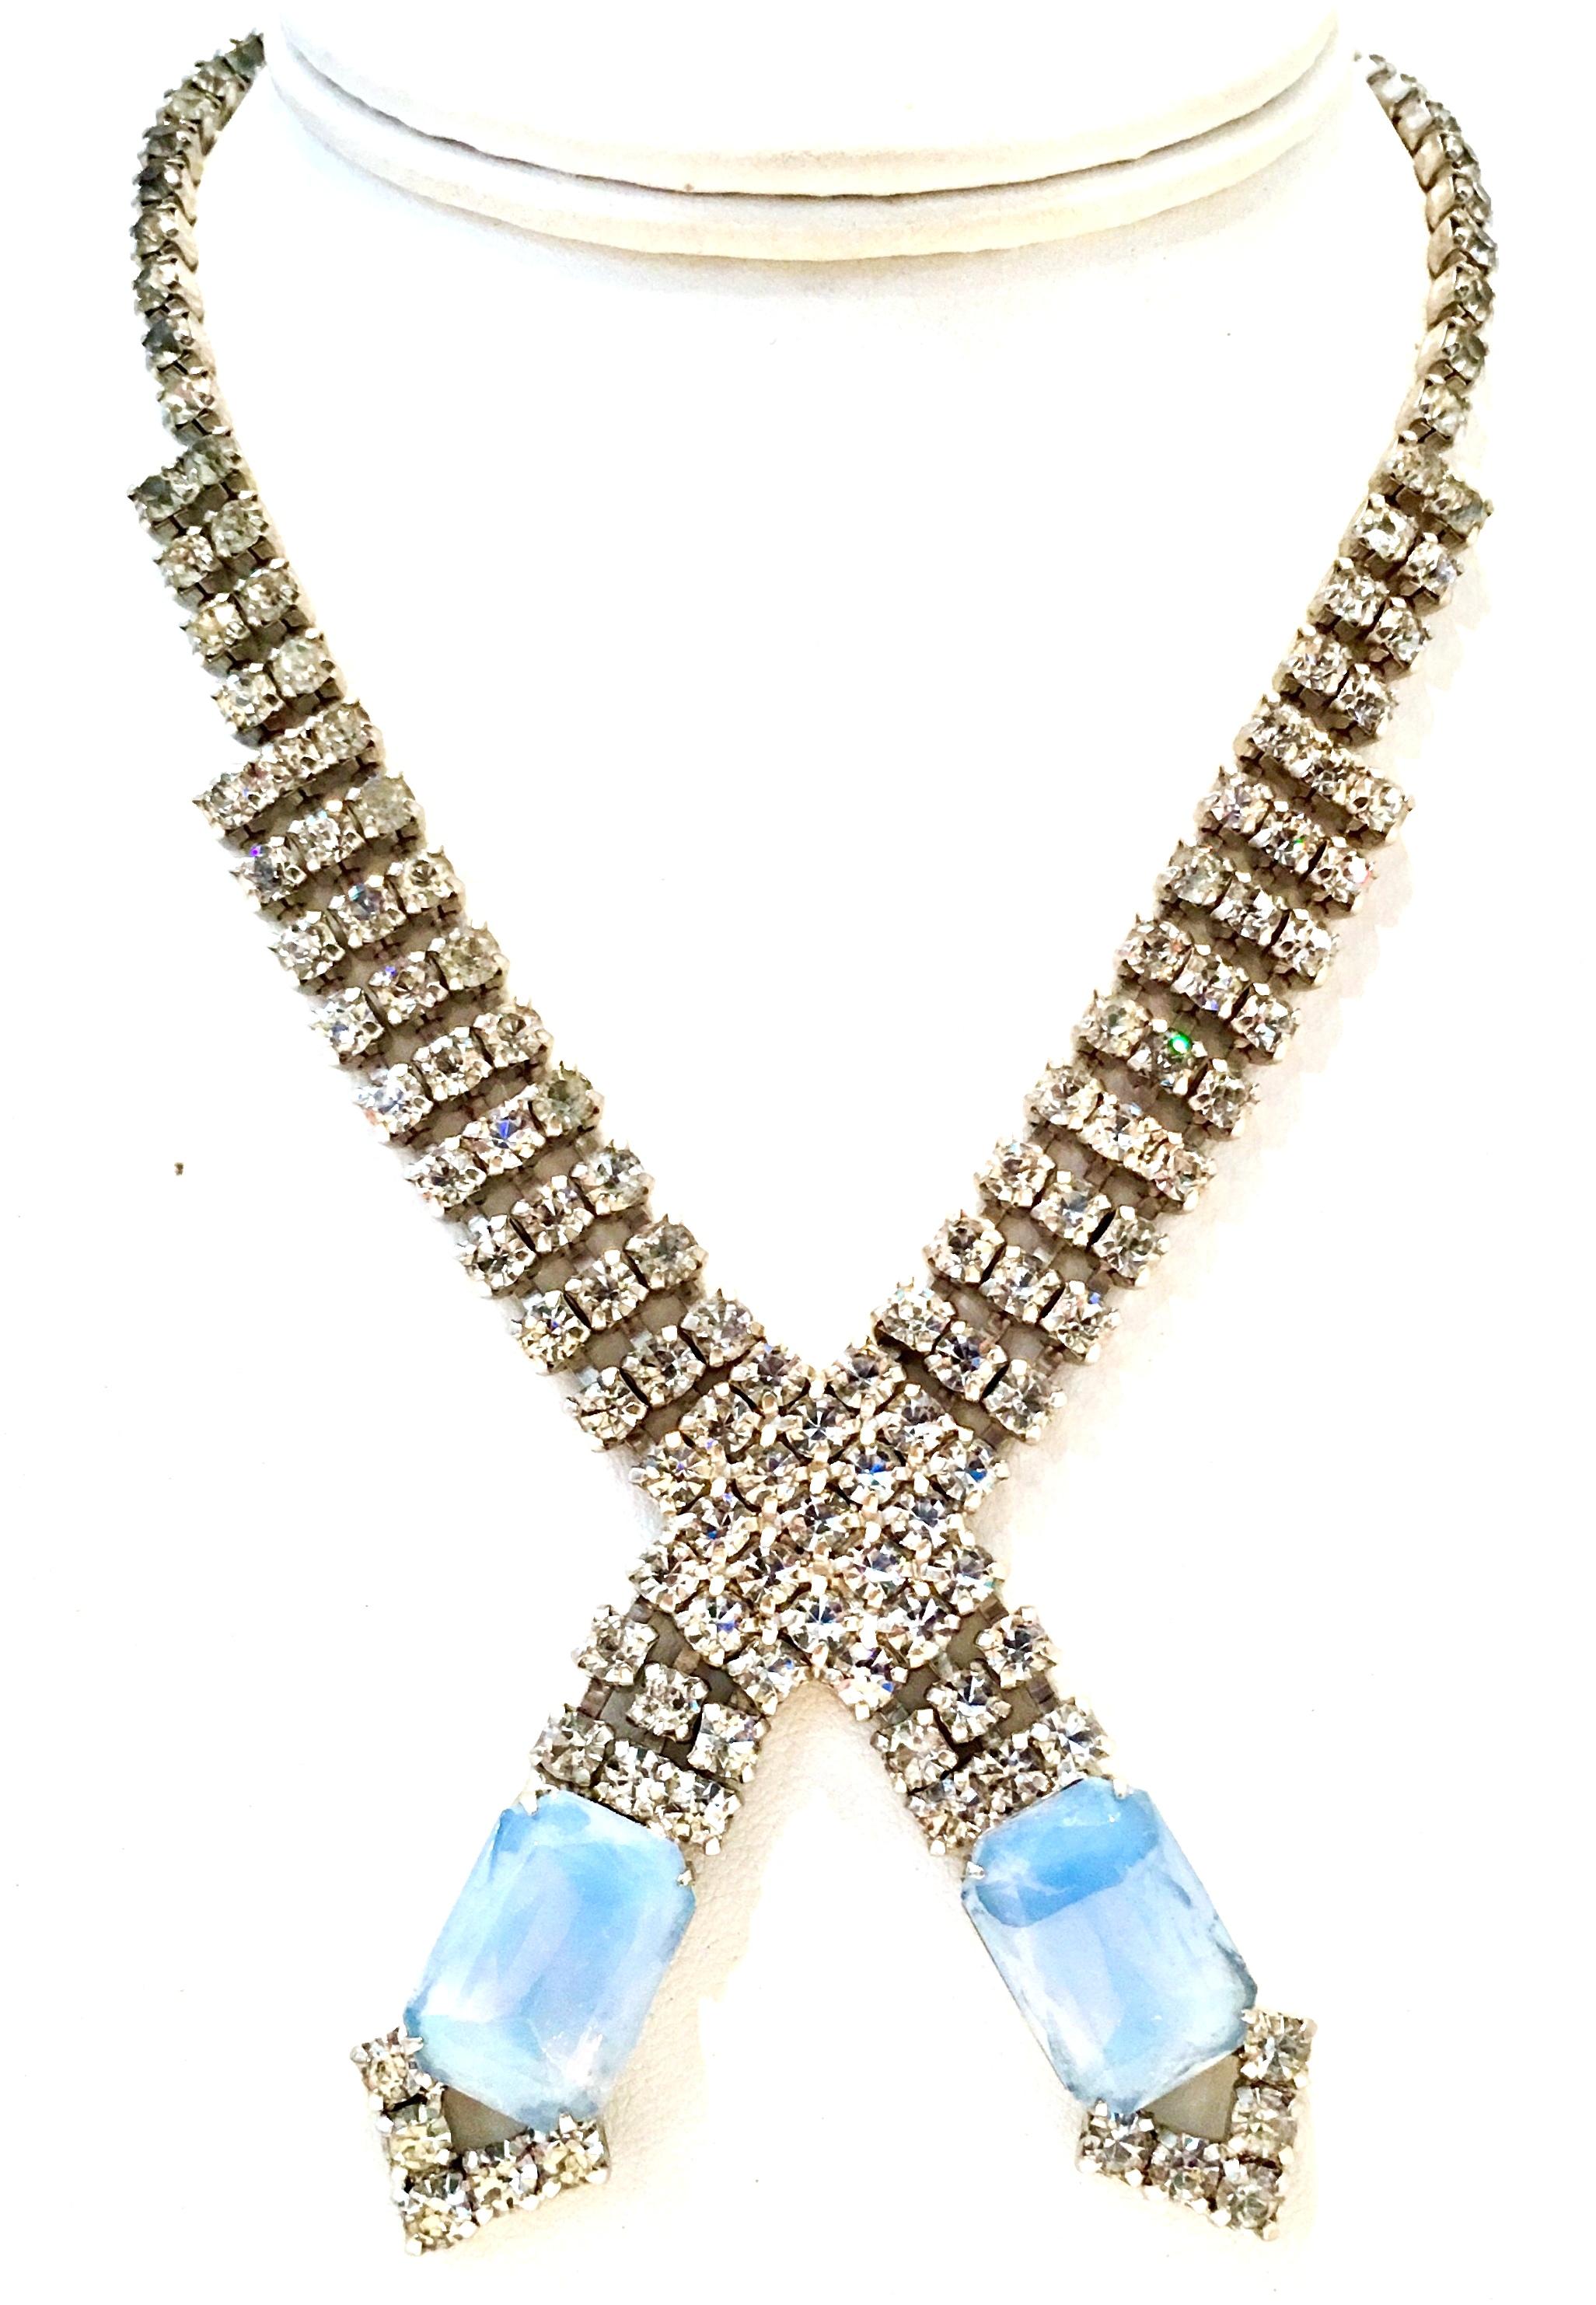 1960'S Silver Rhodium Plate With Brilliant Crystal Clear Swarovski Paste Set & Blue Faceted Glass Moonstone Choker Style Necklace. This incredible piece has a simple adjustable hook closure. Each moonstone is approximately .75